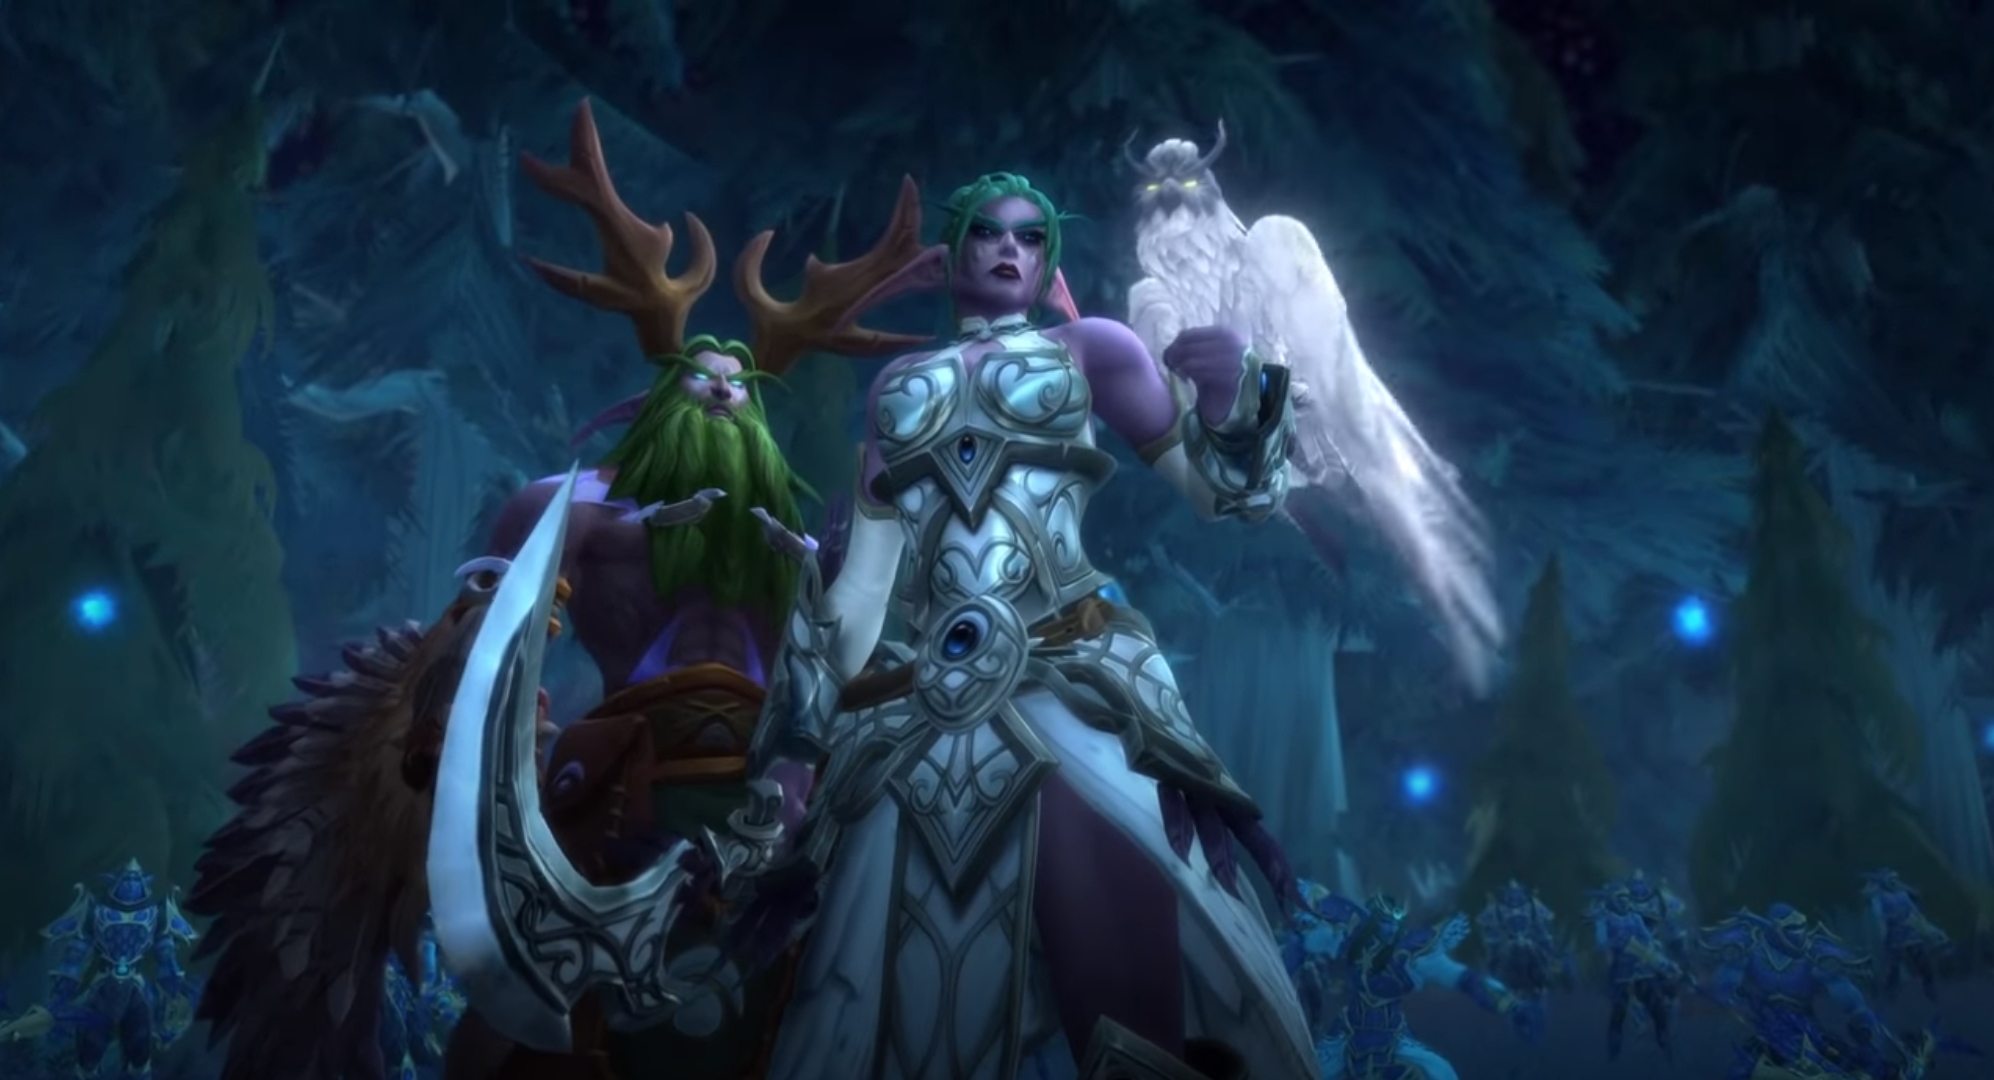 Blizzard Seems To Be Teasing A Return Of World Of Warcraft’s Destroyed Night Elf Home, Teldrassil